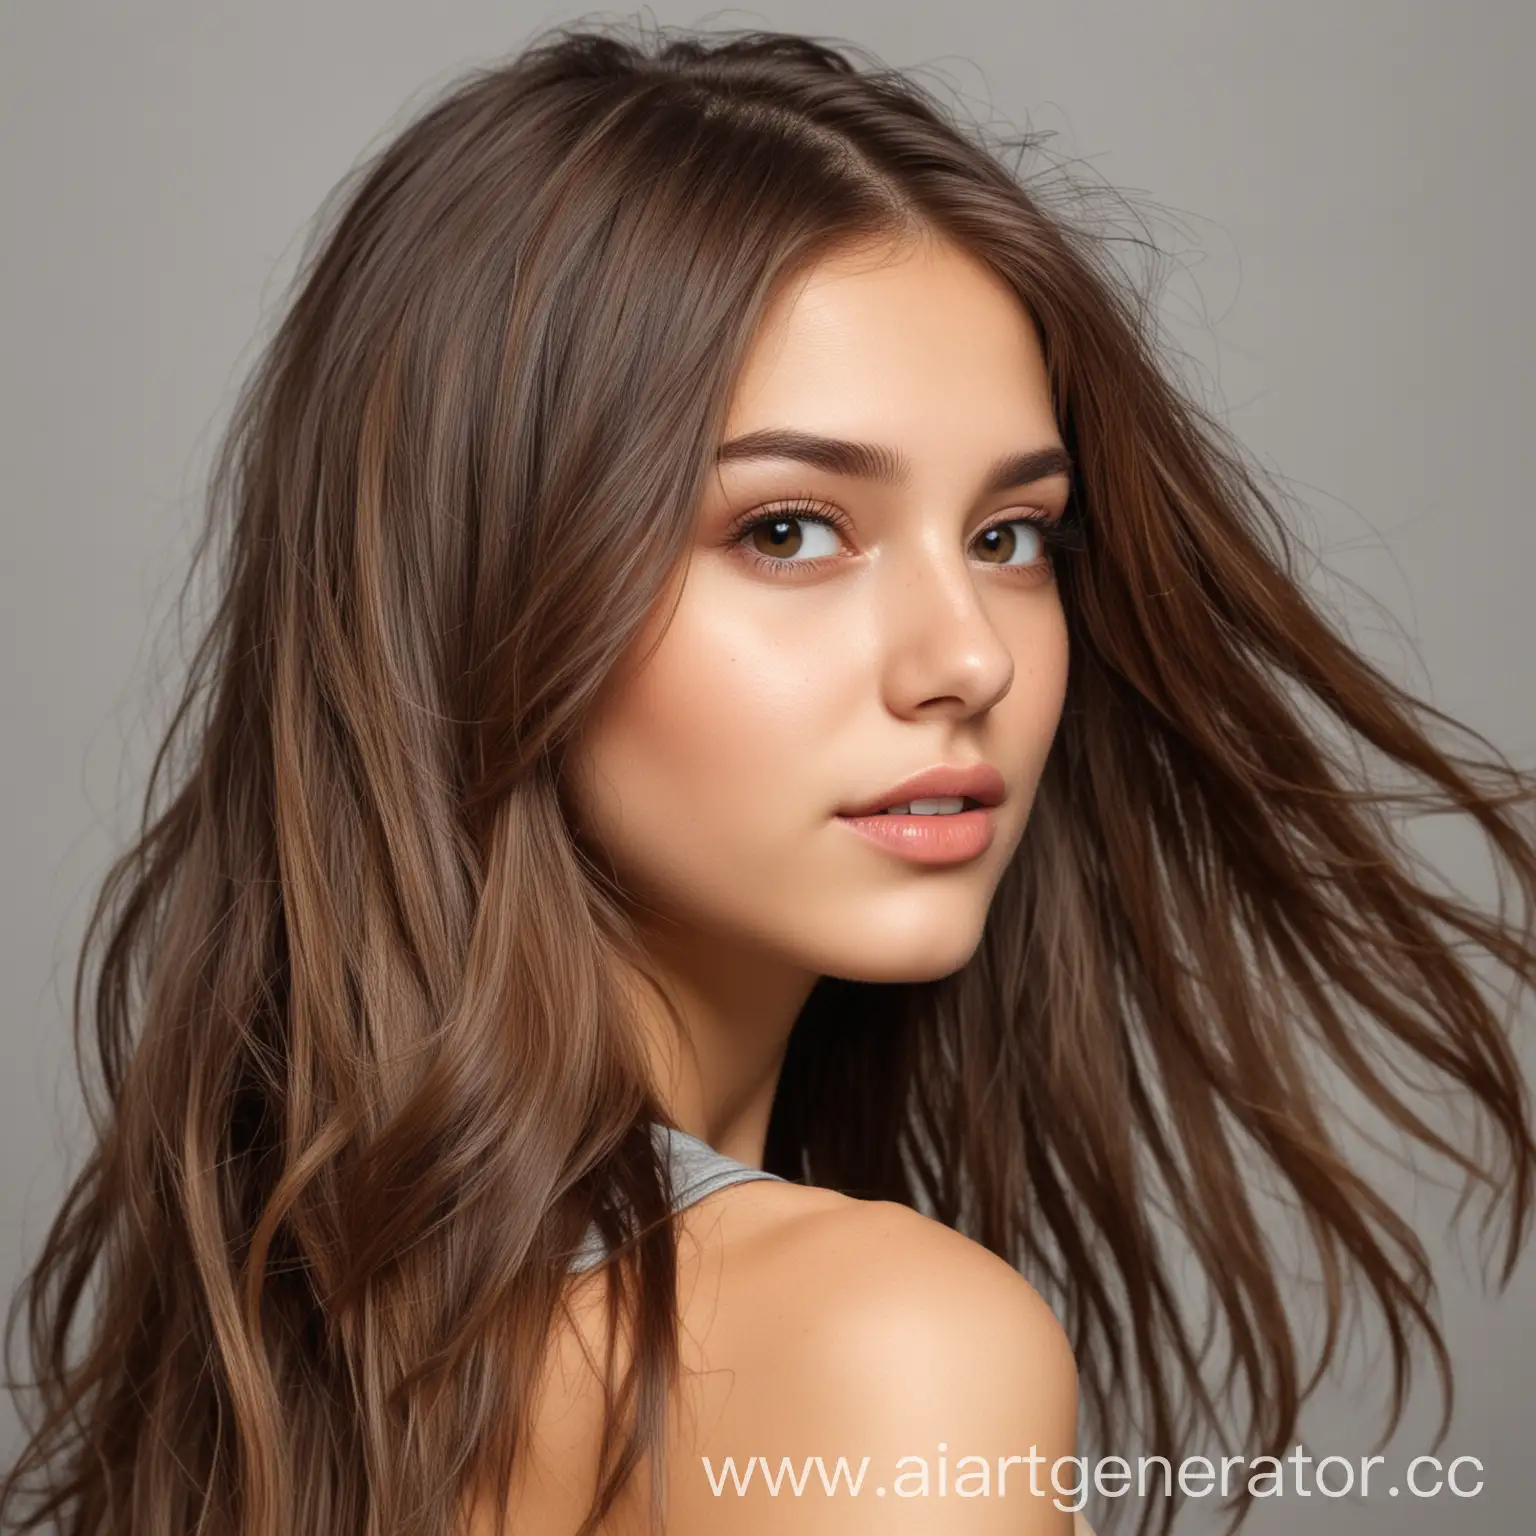 Girl-with-ShoulderLength-Hair-and-Shatush-Coloring